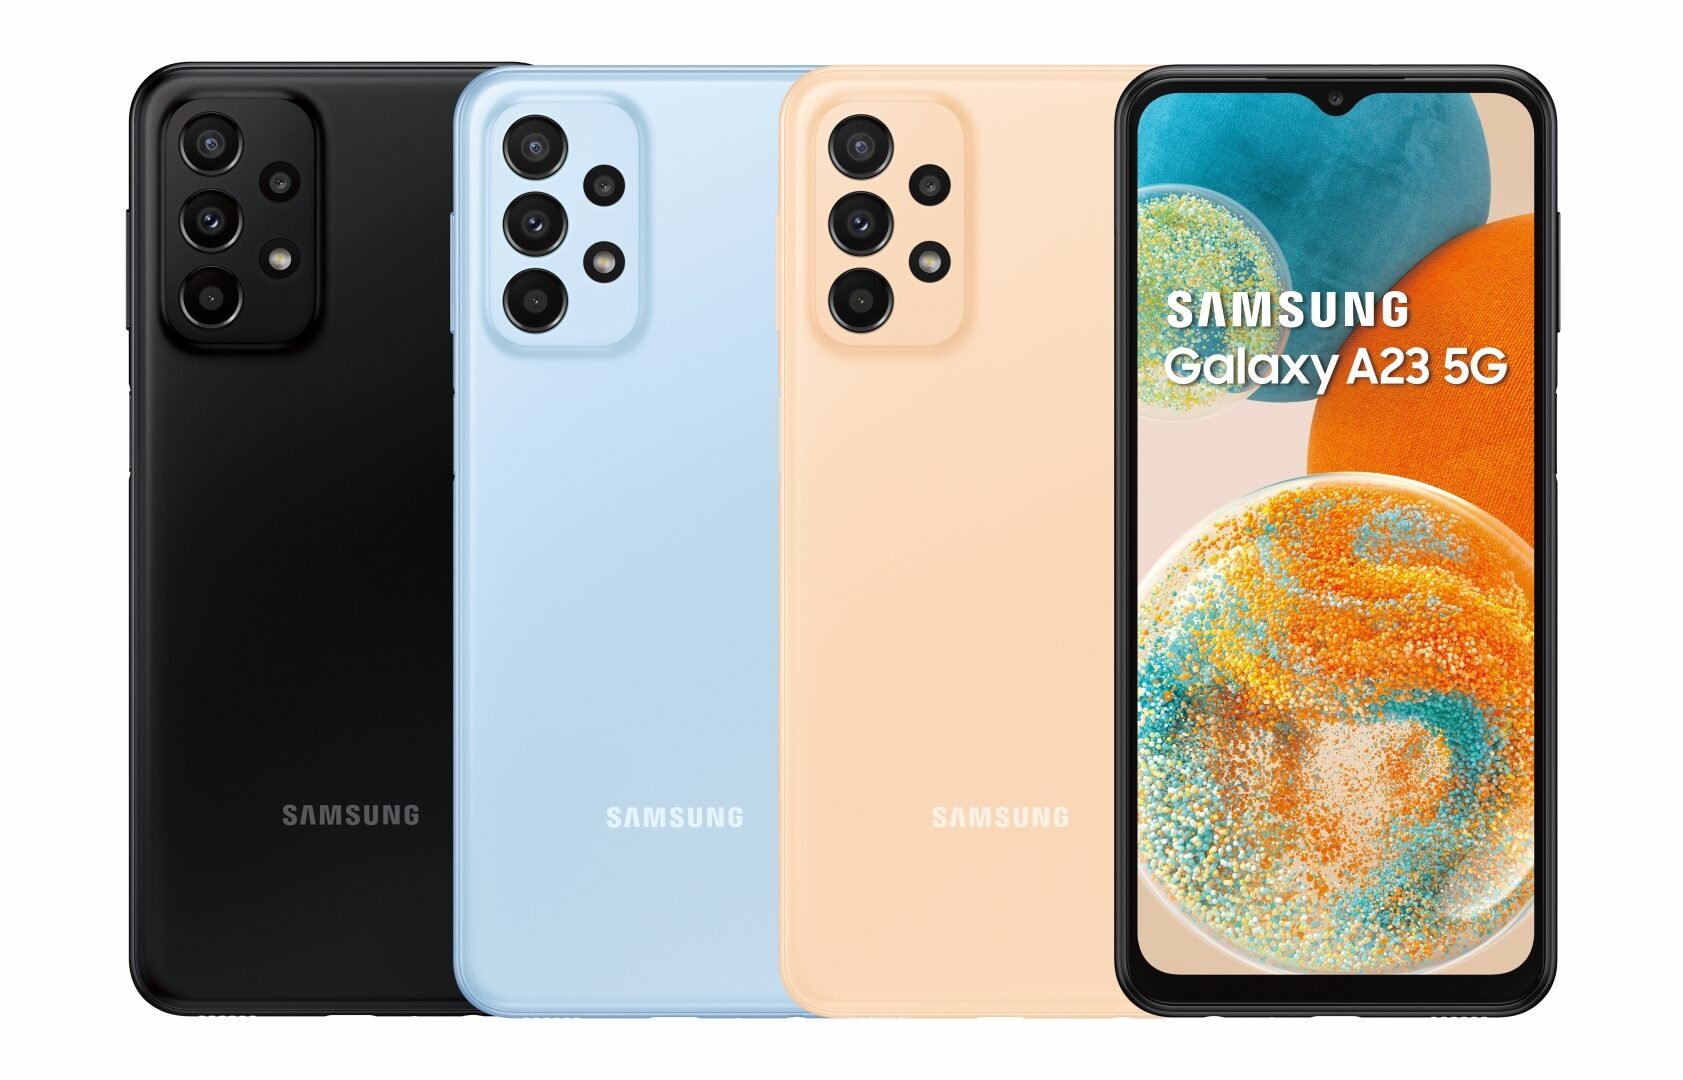 Samsung confirms Galaxy A23 5G release date, price, wall charger